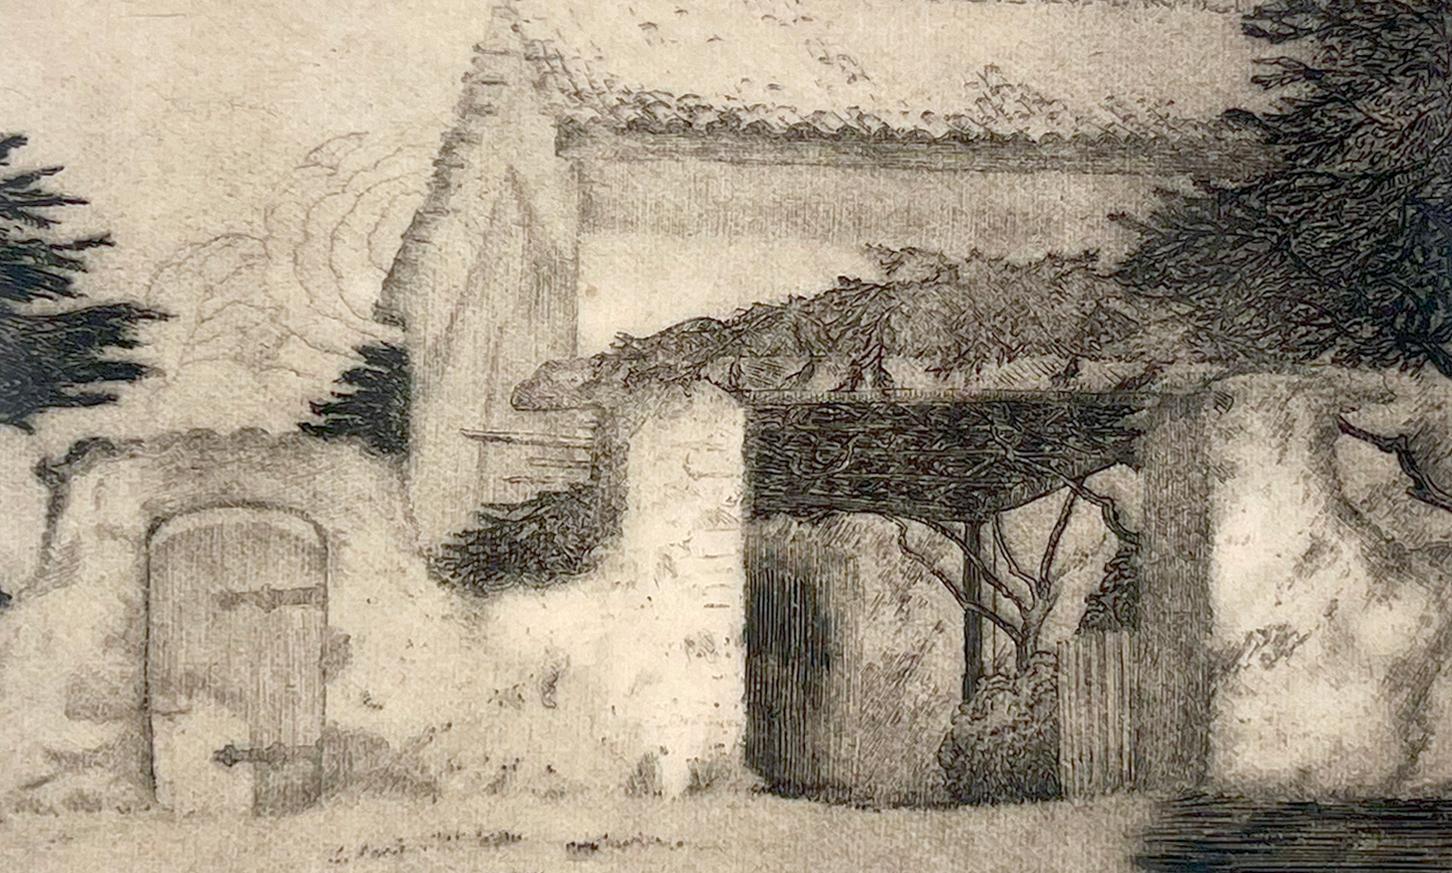 Beautiful early 20th Century etching on vellum of the Monterey Bonifacio Adobe known as The Old Sherman Rose House, with climbing roses, by Ferdinand Burgdorff (American, (1881 - 1975), 1923. As in many of the artist's works, this piece conveys a